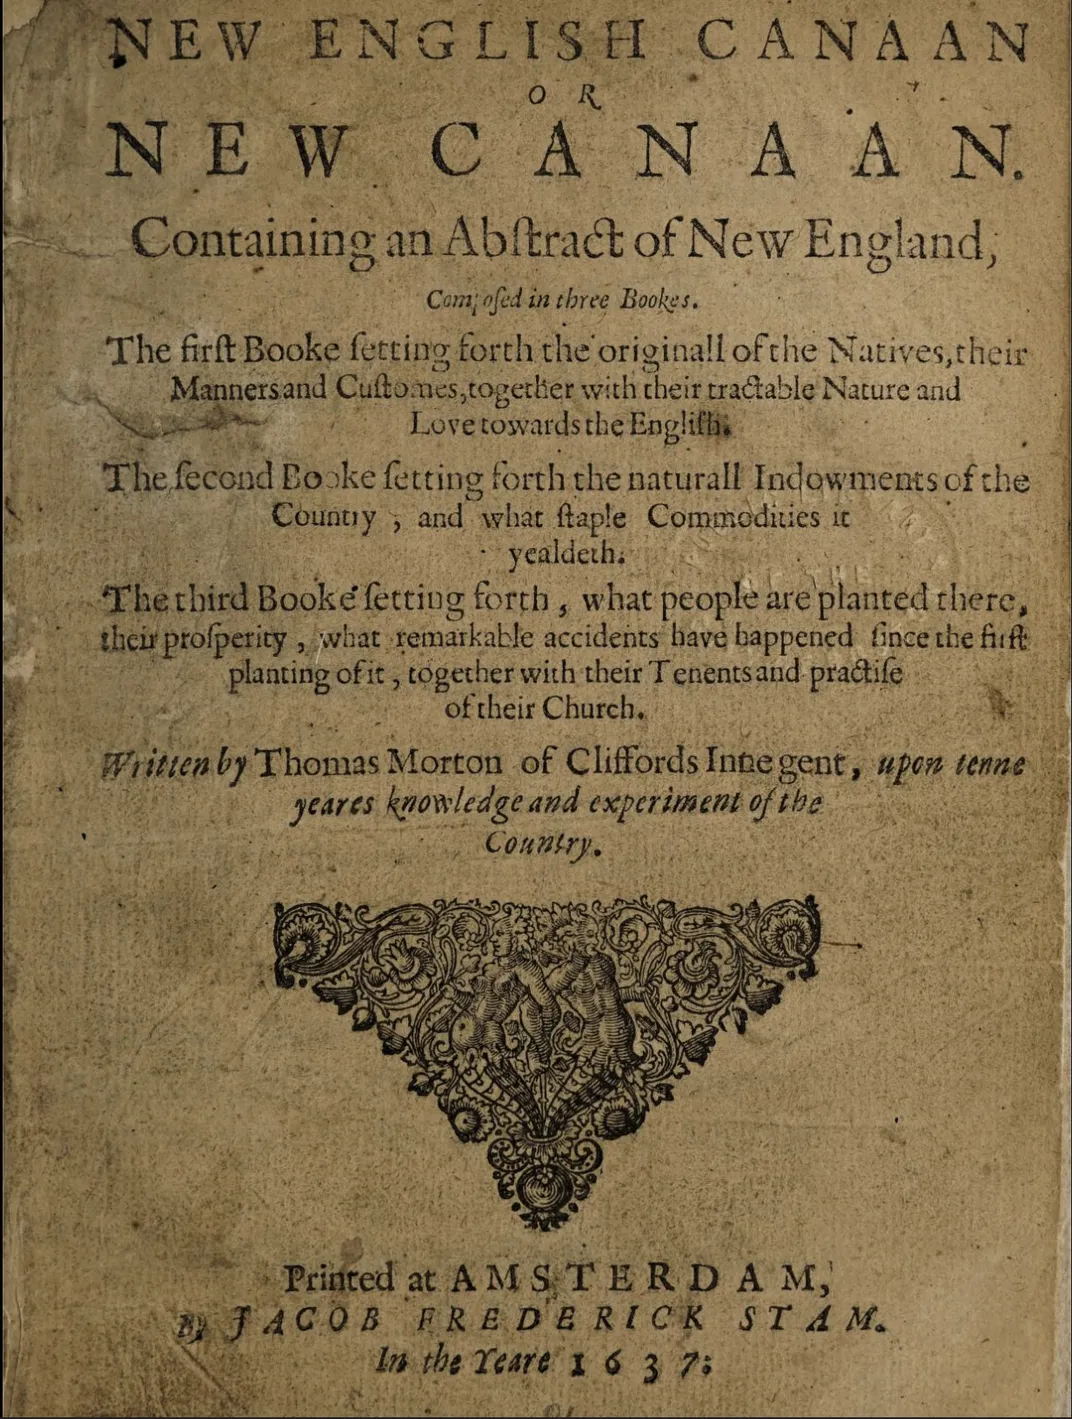 The title page of New English Canaan​​​​​​​